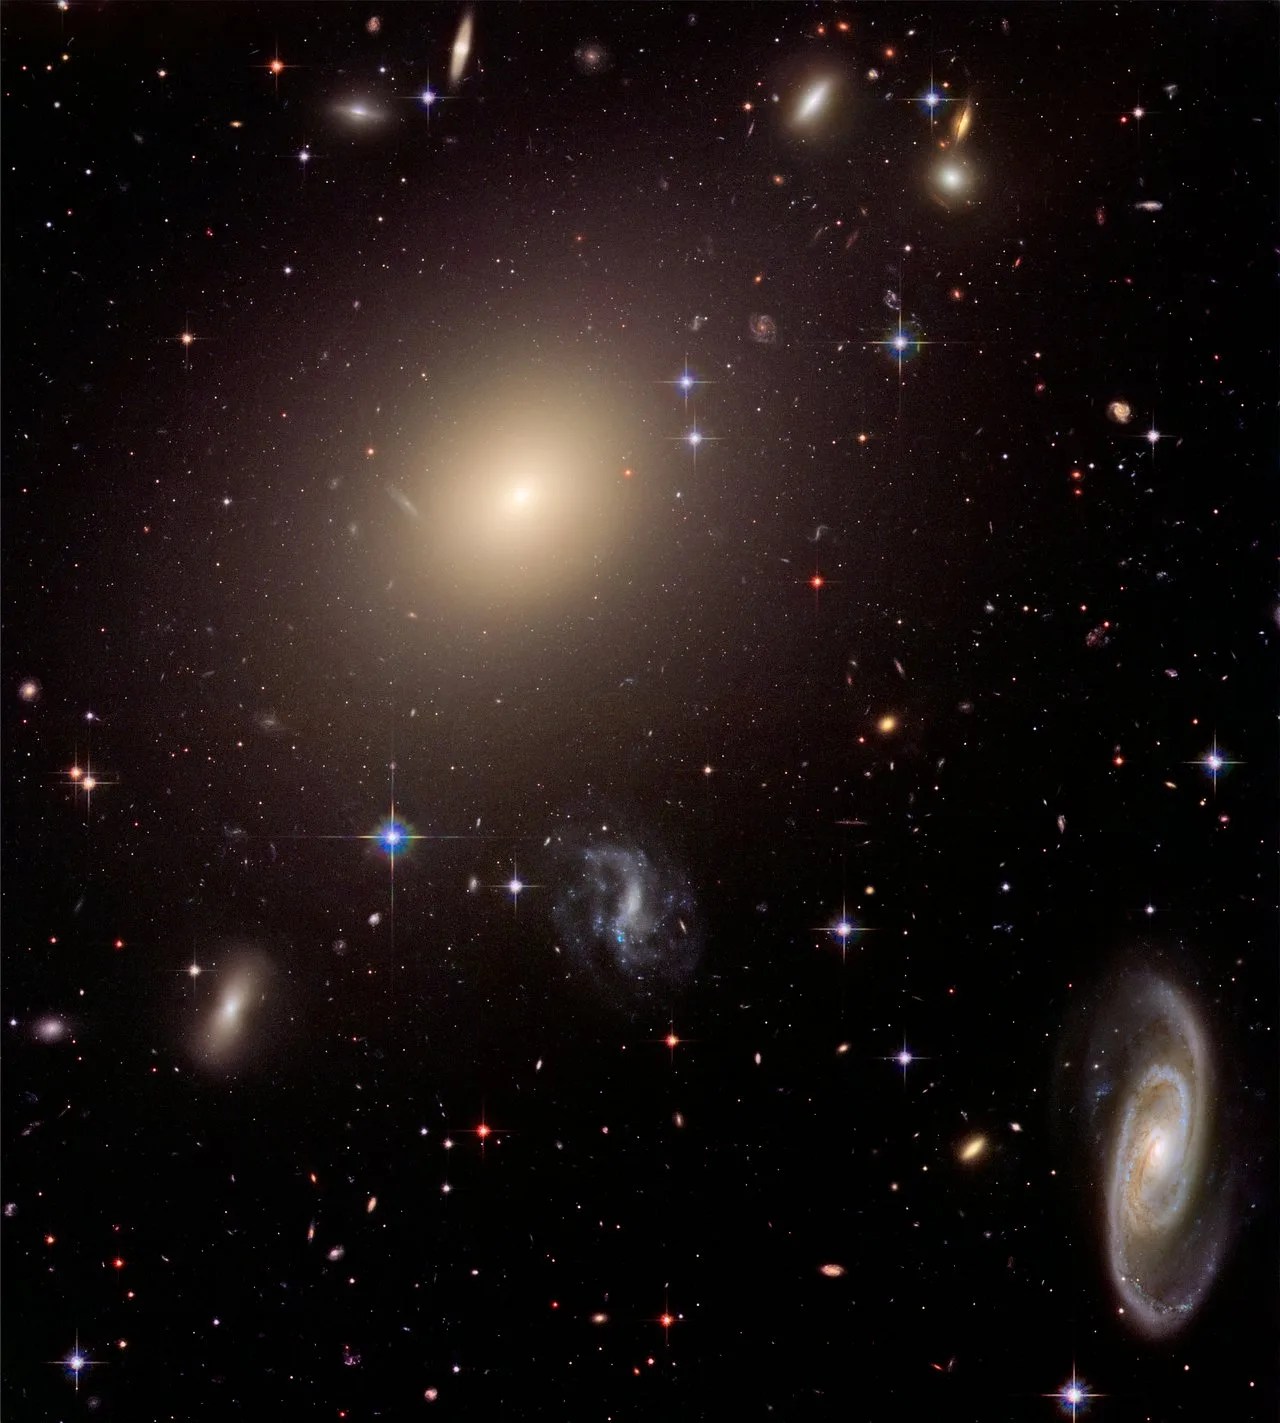 The field is filled with galaxies. One large elliptical galaxy is in the upper-left quadrant, just left of center. A large spiral galaxy is on its side near the right corner.